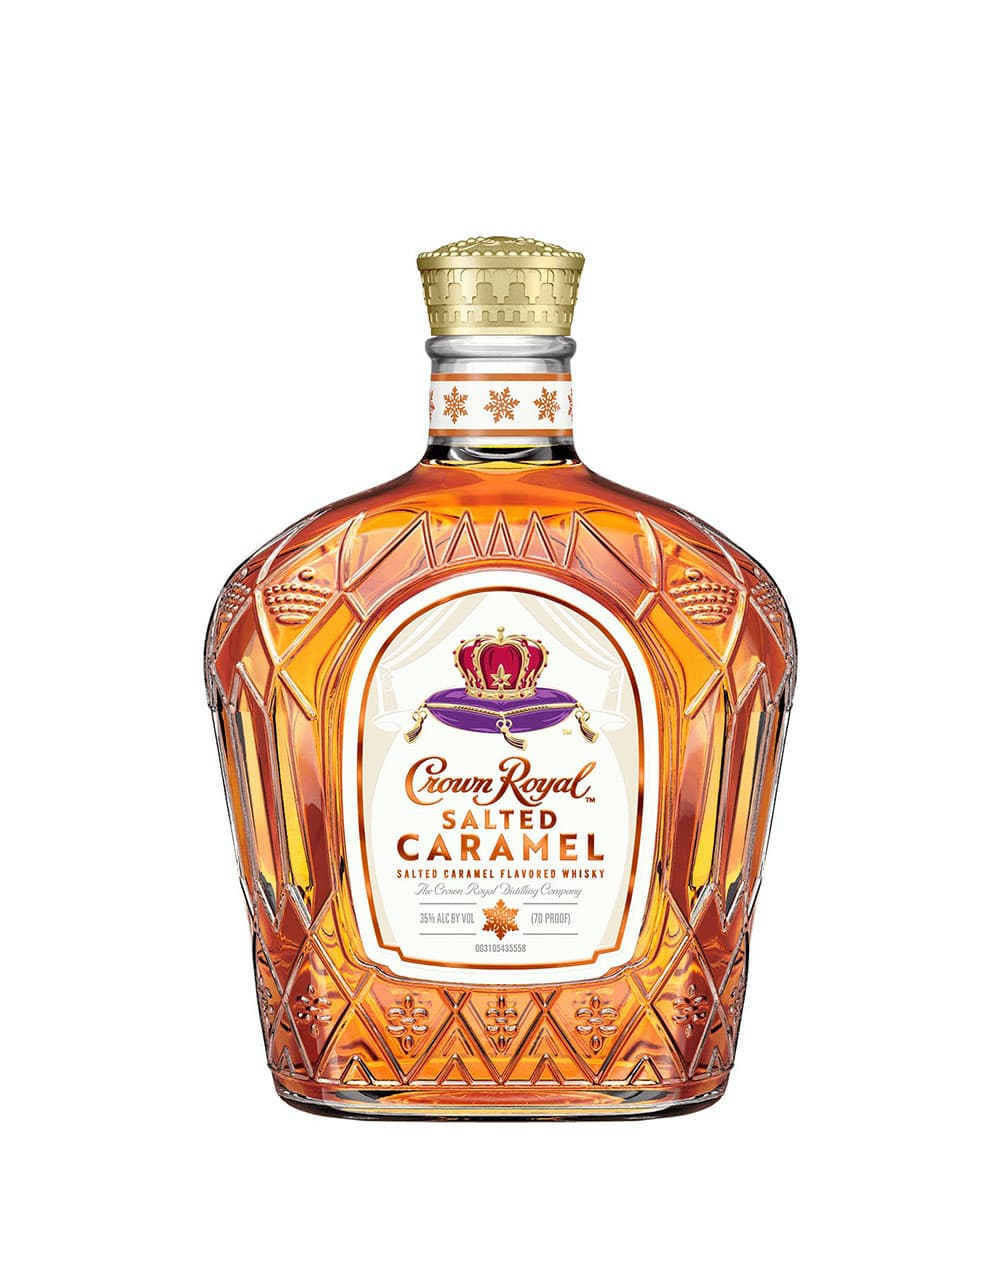 Crown Royal Maple Finished Canadian Whisky, 750 mL - Foods Co.